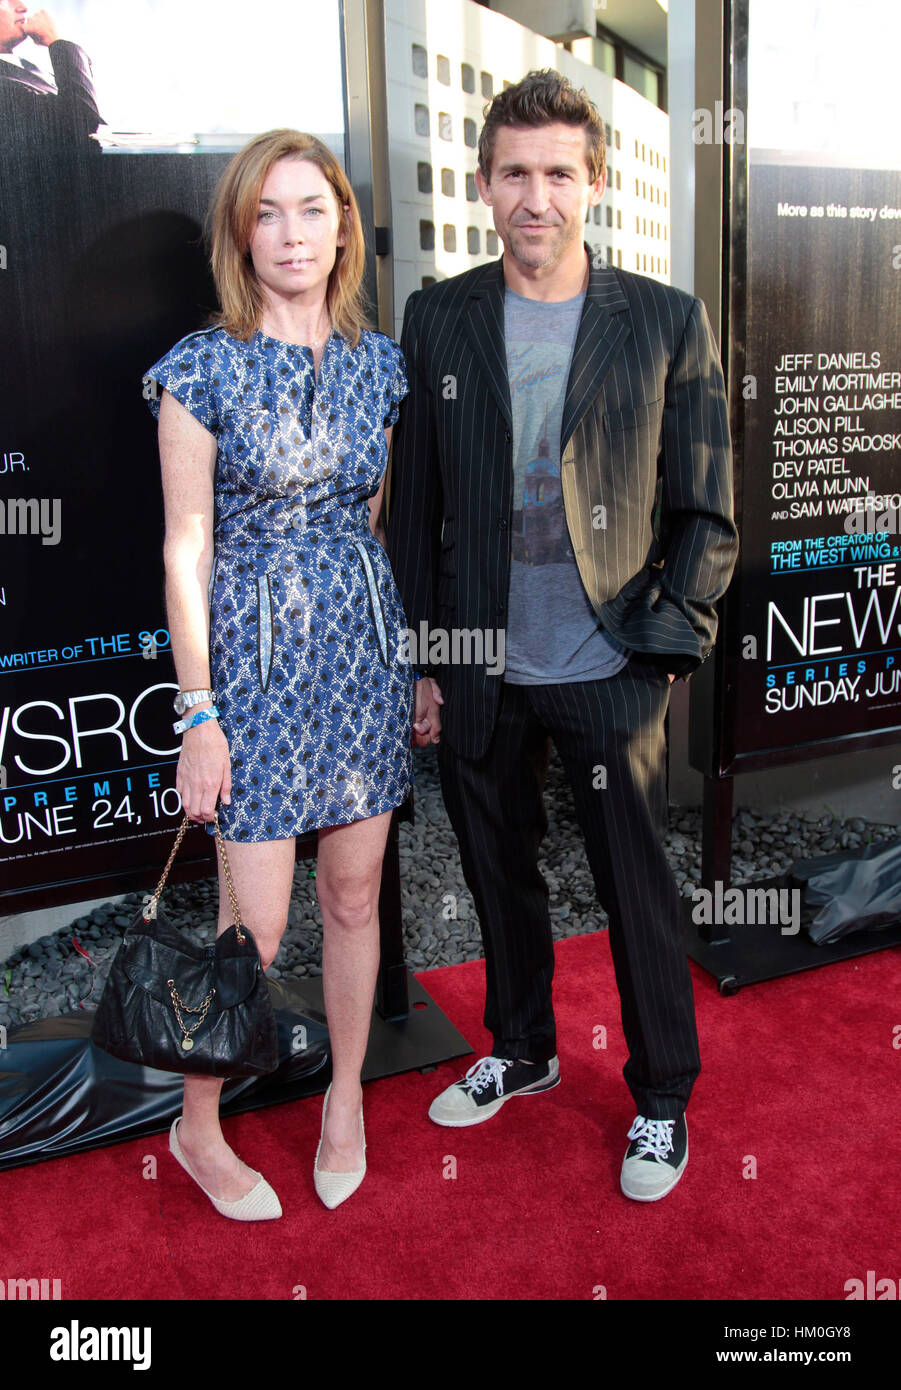 Julianne Nicholson and Jonathan Cake arrive at the premiere for the HBO series, 'The Newsroom' in Hollywood, California, on June 20, 2012. Photo by Francis Specker Stock Photo